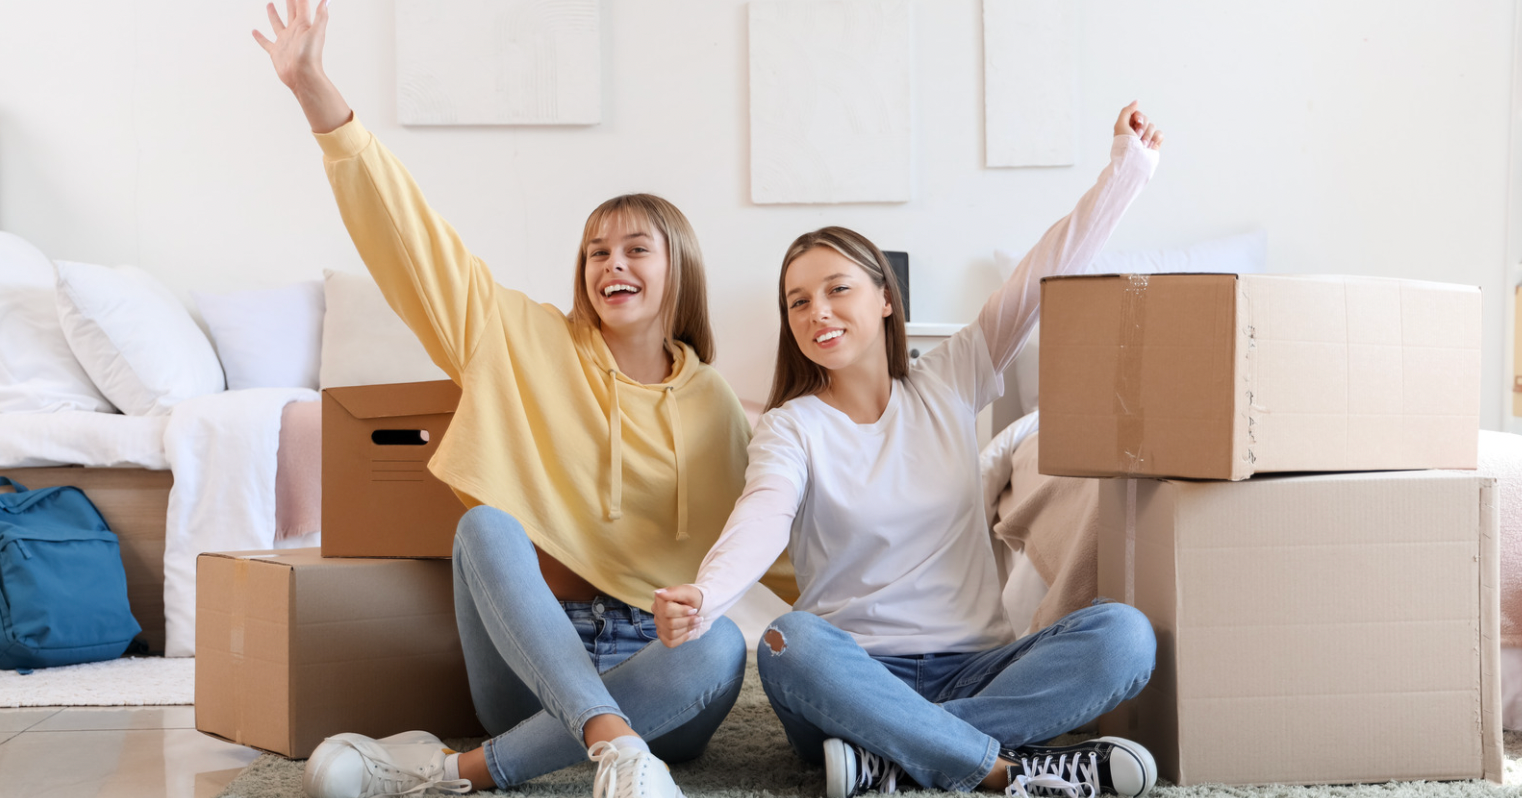 9 Tips for Unpacking Without Mom's Help